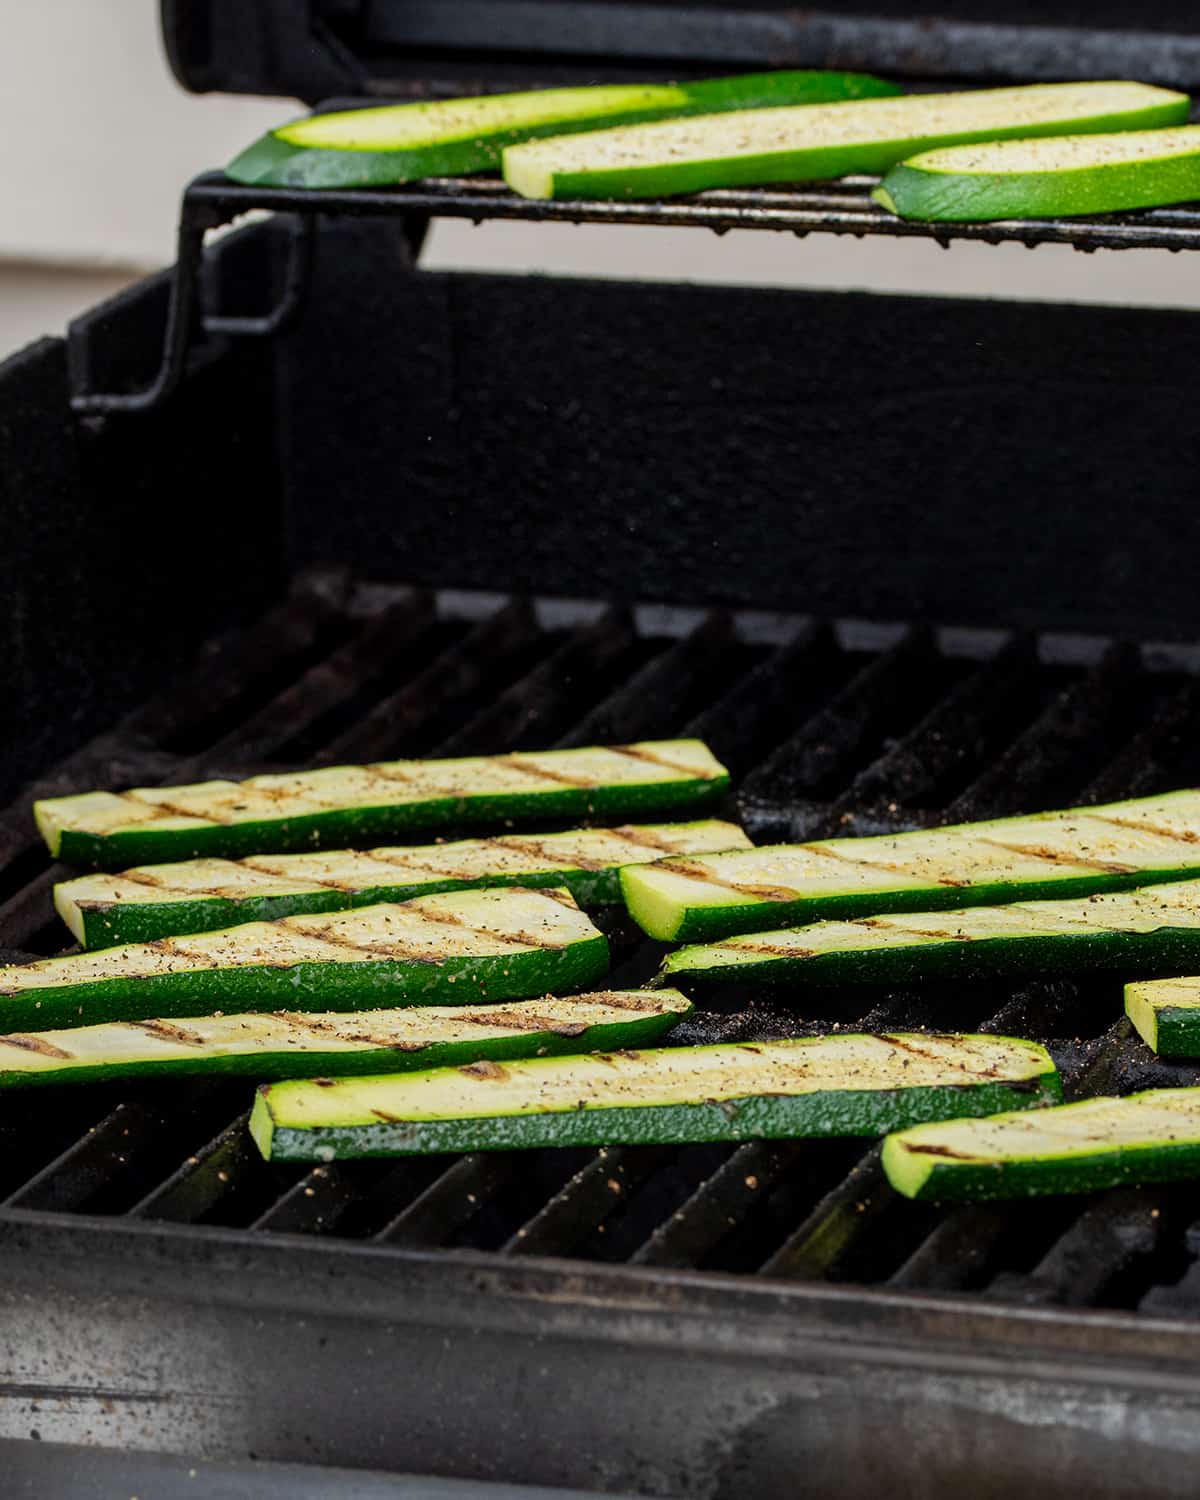 Zucchini steaks on a grill seasoned with salt and pepper.